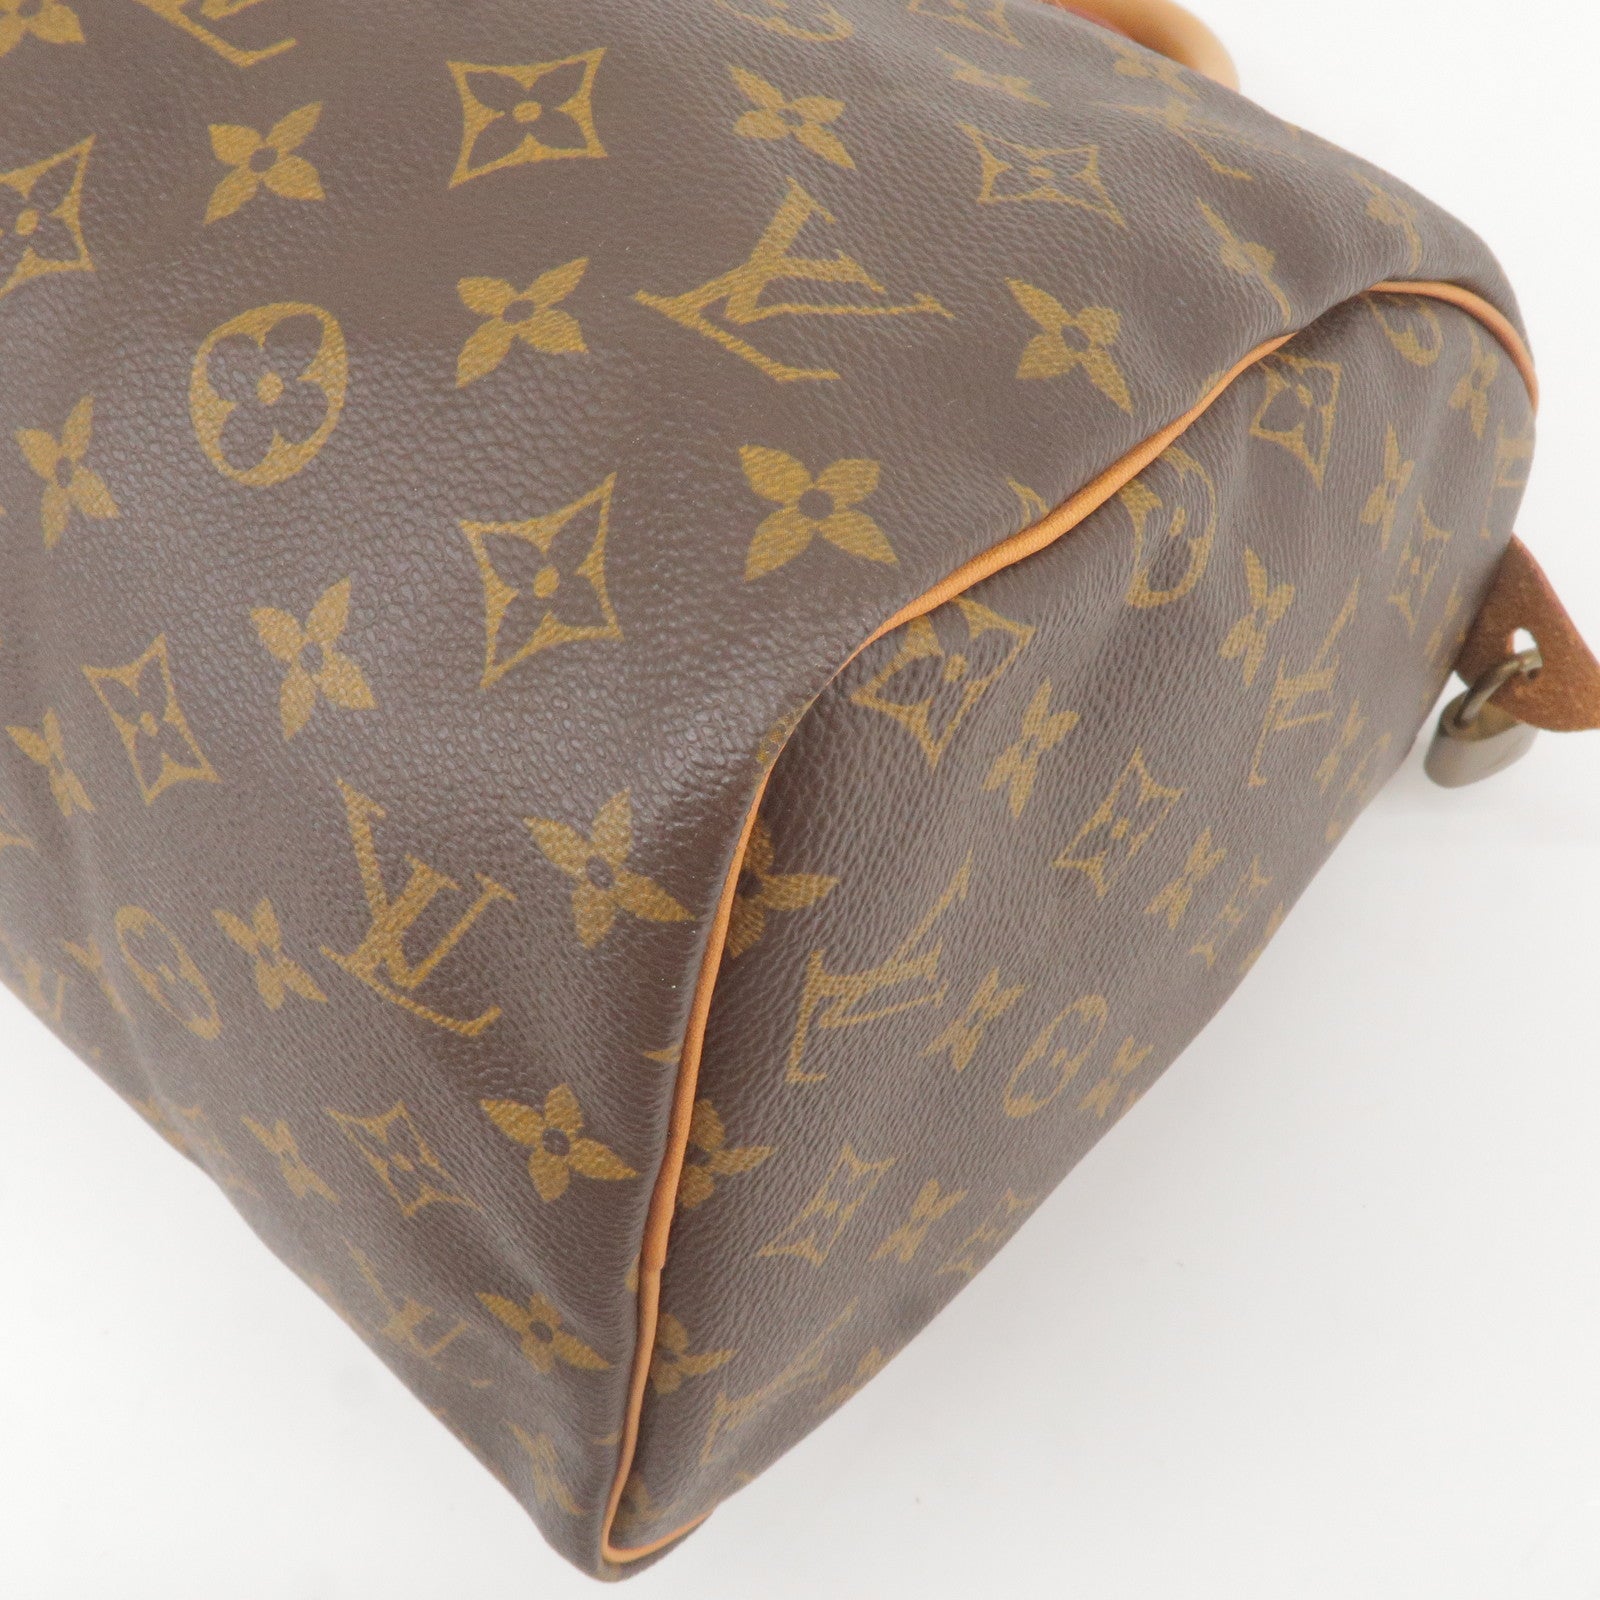 Buy Free Shipping Authentic Pre-owned Louis Vuitton Vintage Lv Monogram  Speedy 30 Hand Bag Duffle M41526 M41108 210077 from Japan - Buy authentic  Plus exclusive items from Japan